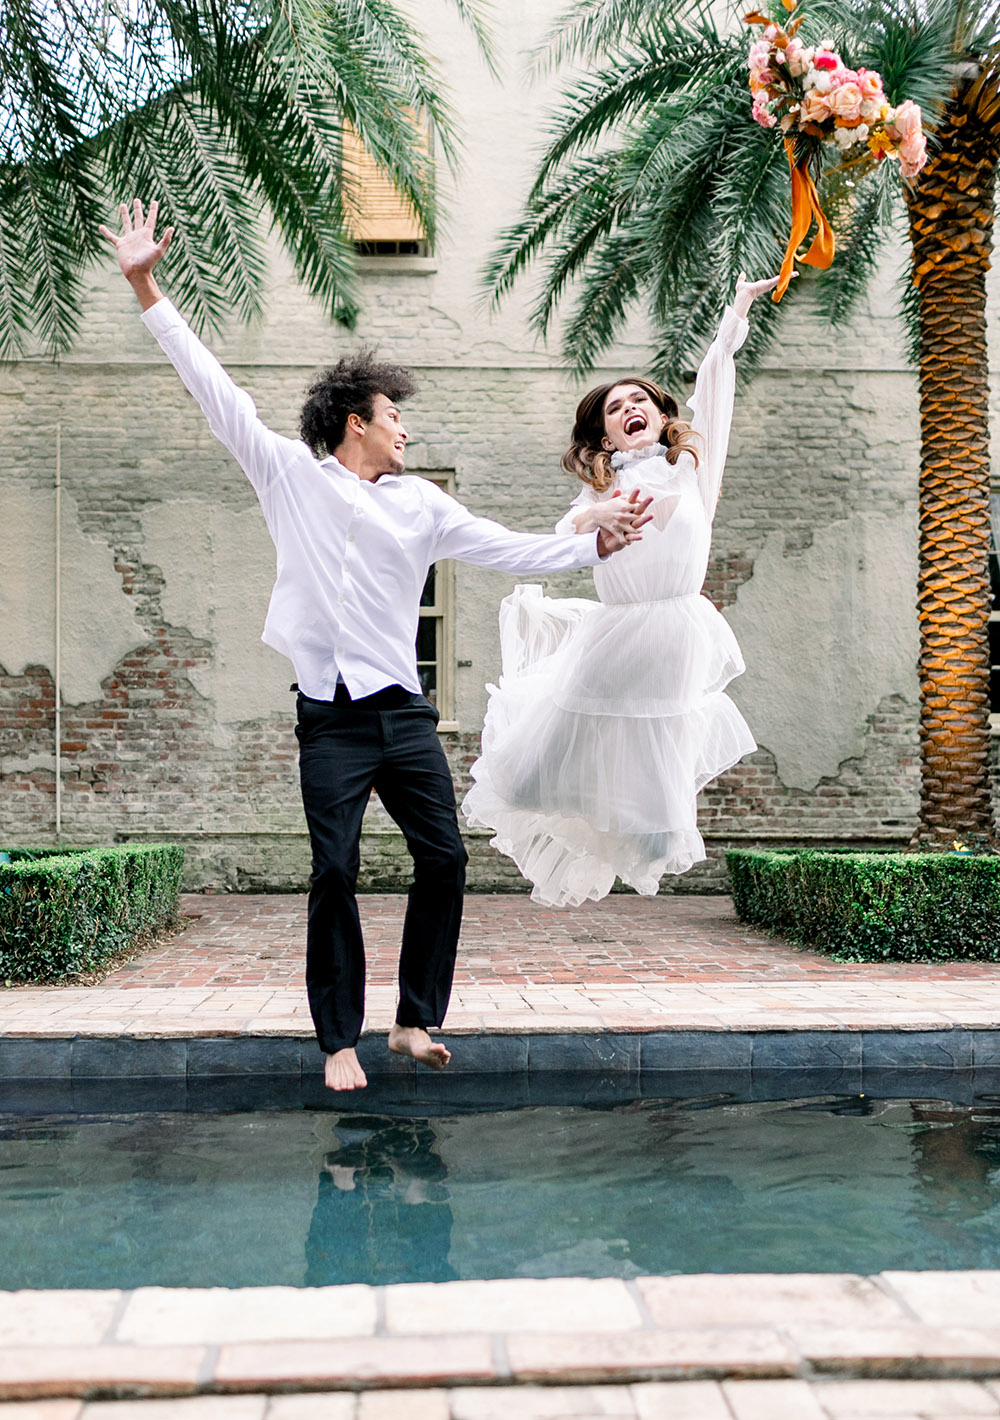 Bride and groom jump into swimming pool